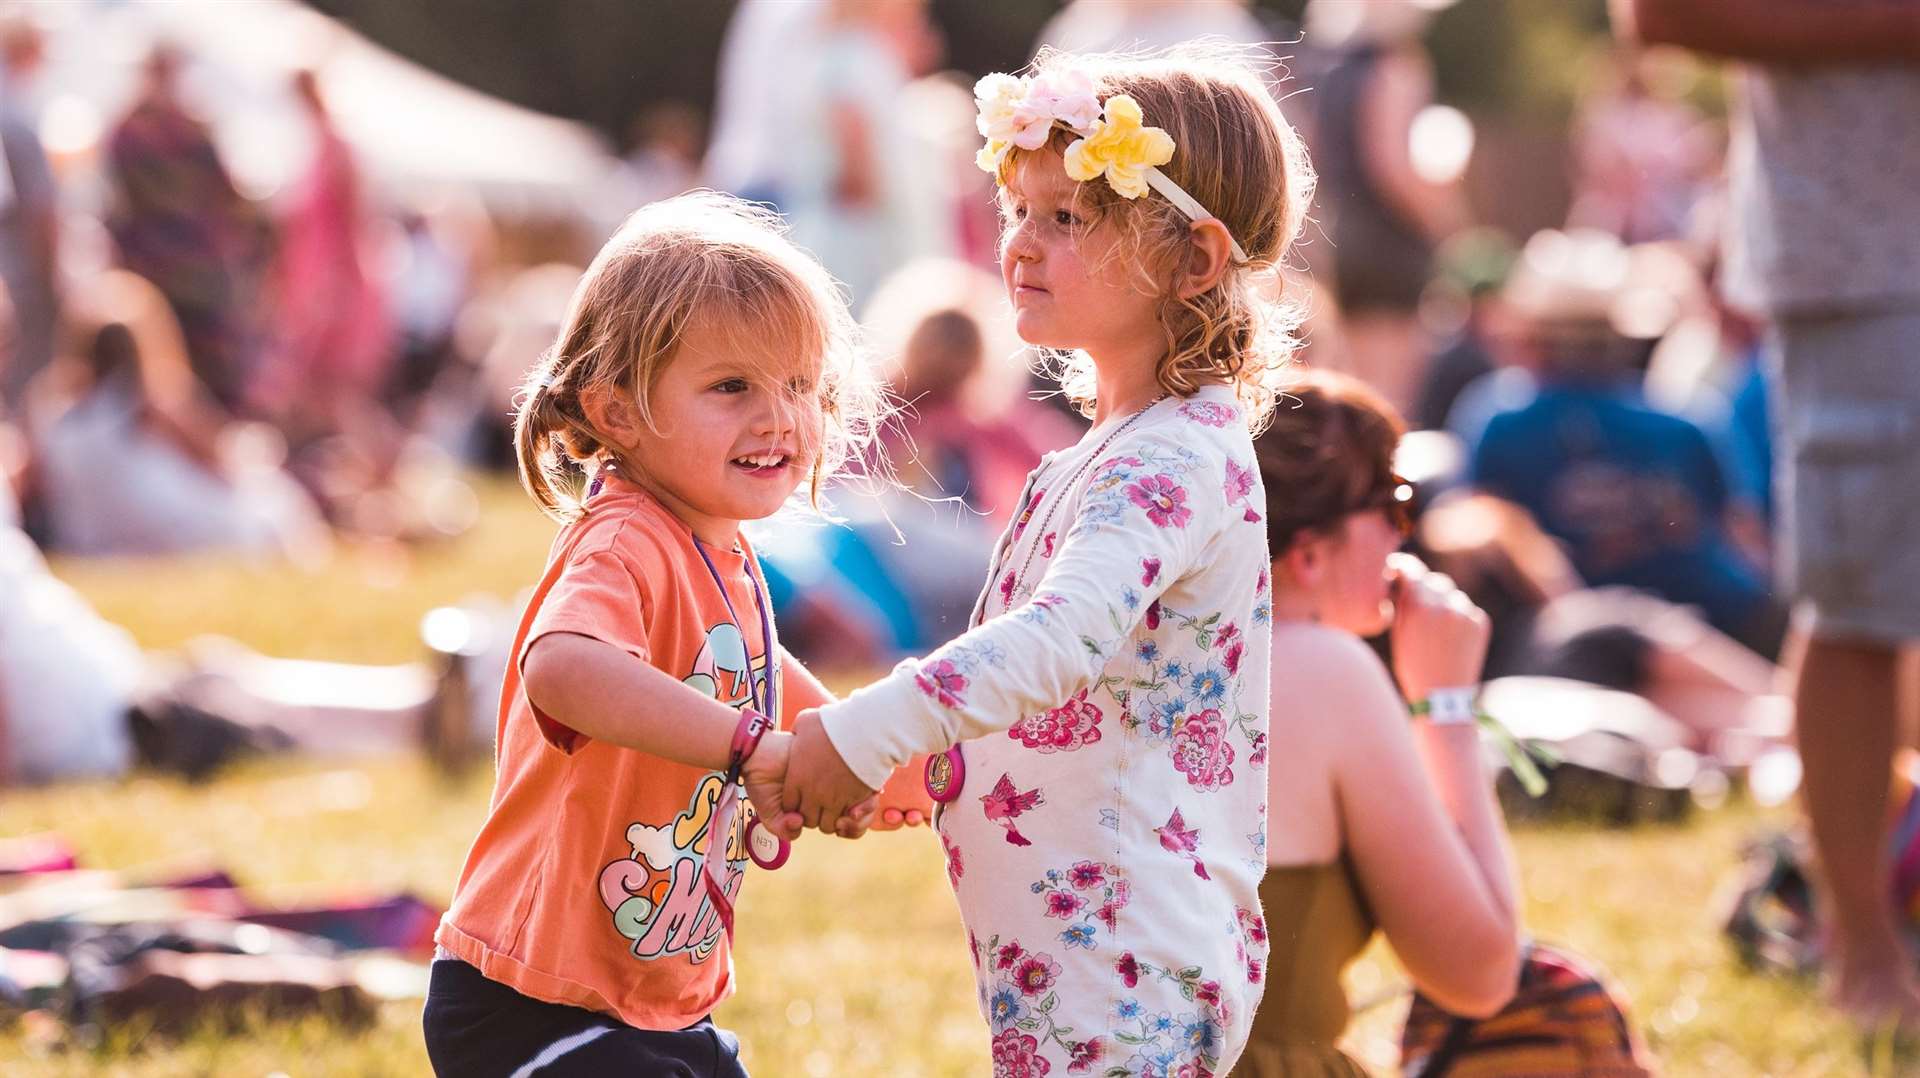 The festival has lined up lots of family activities for the weekend. Picture: Caitlin Mogridge